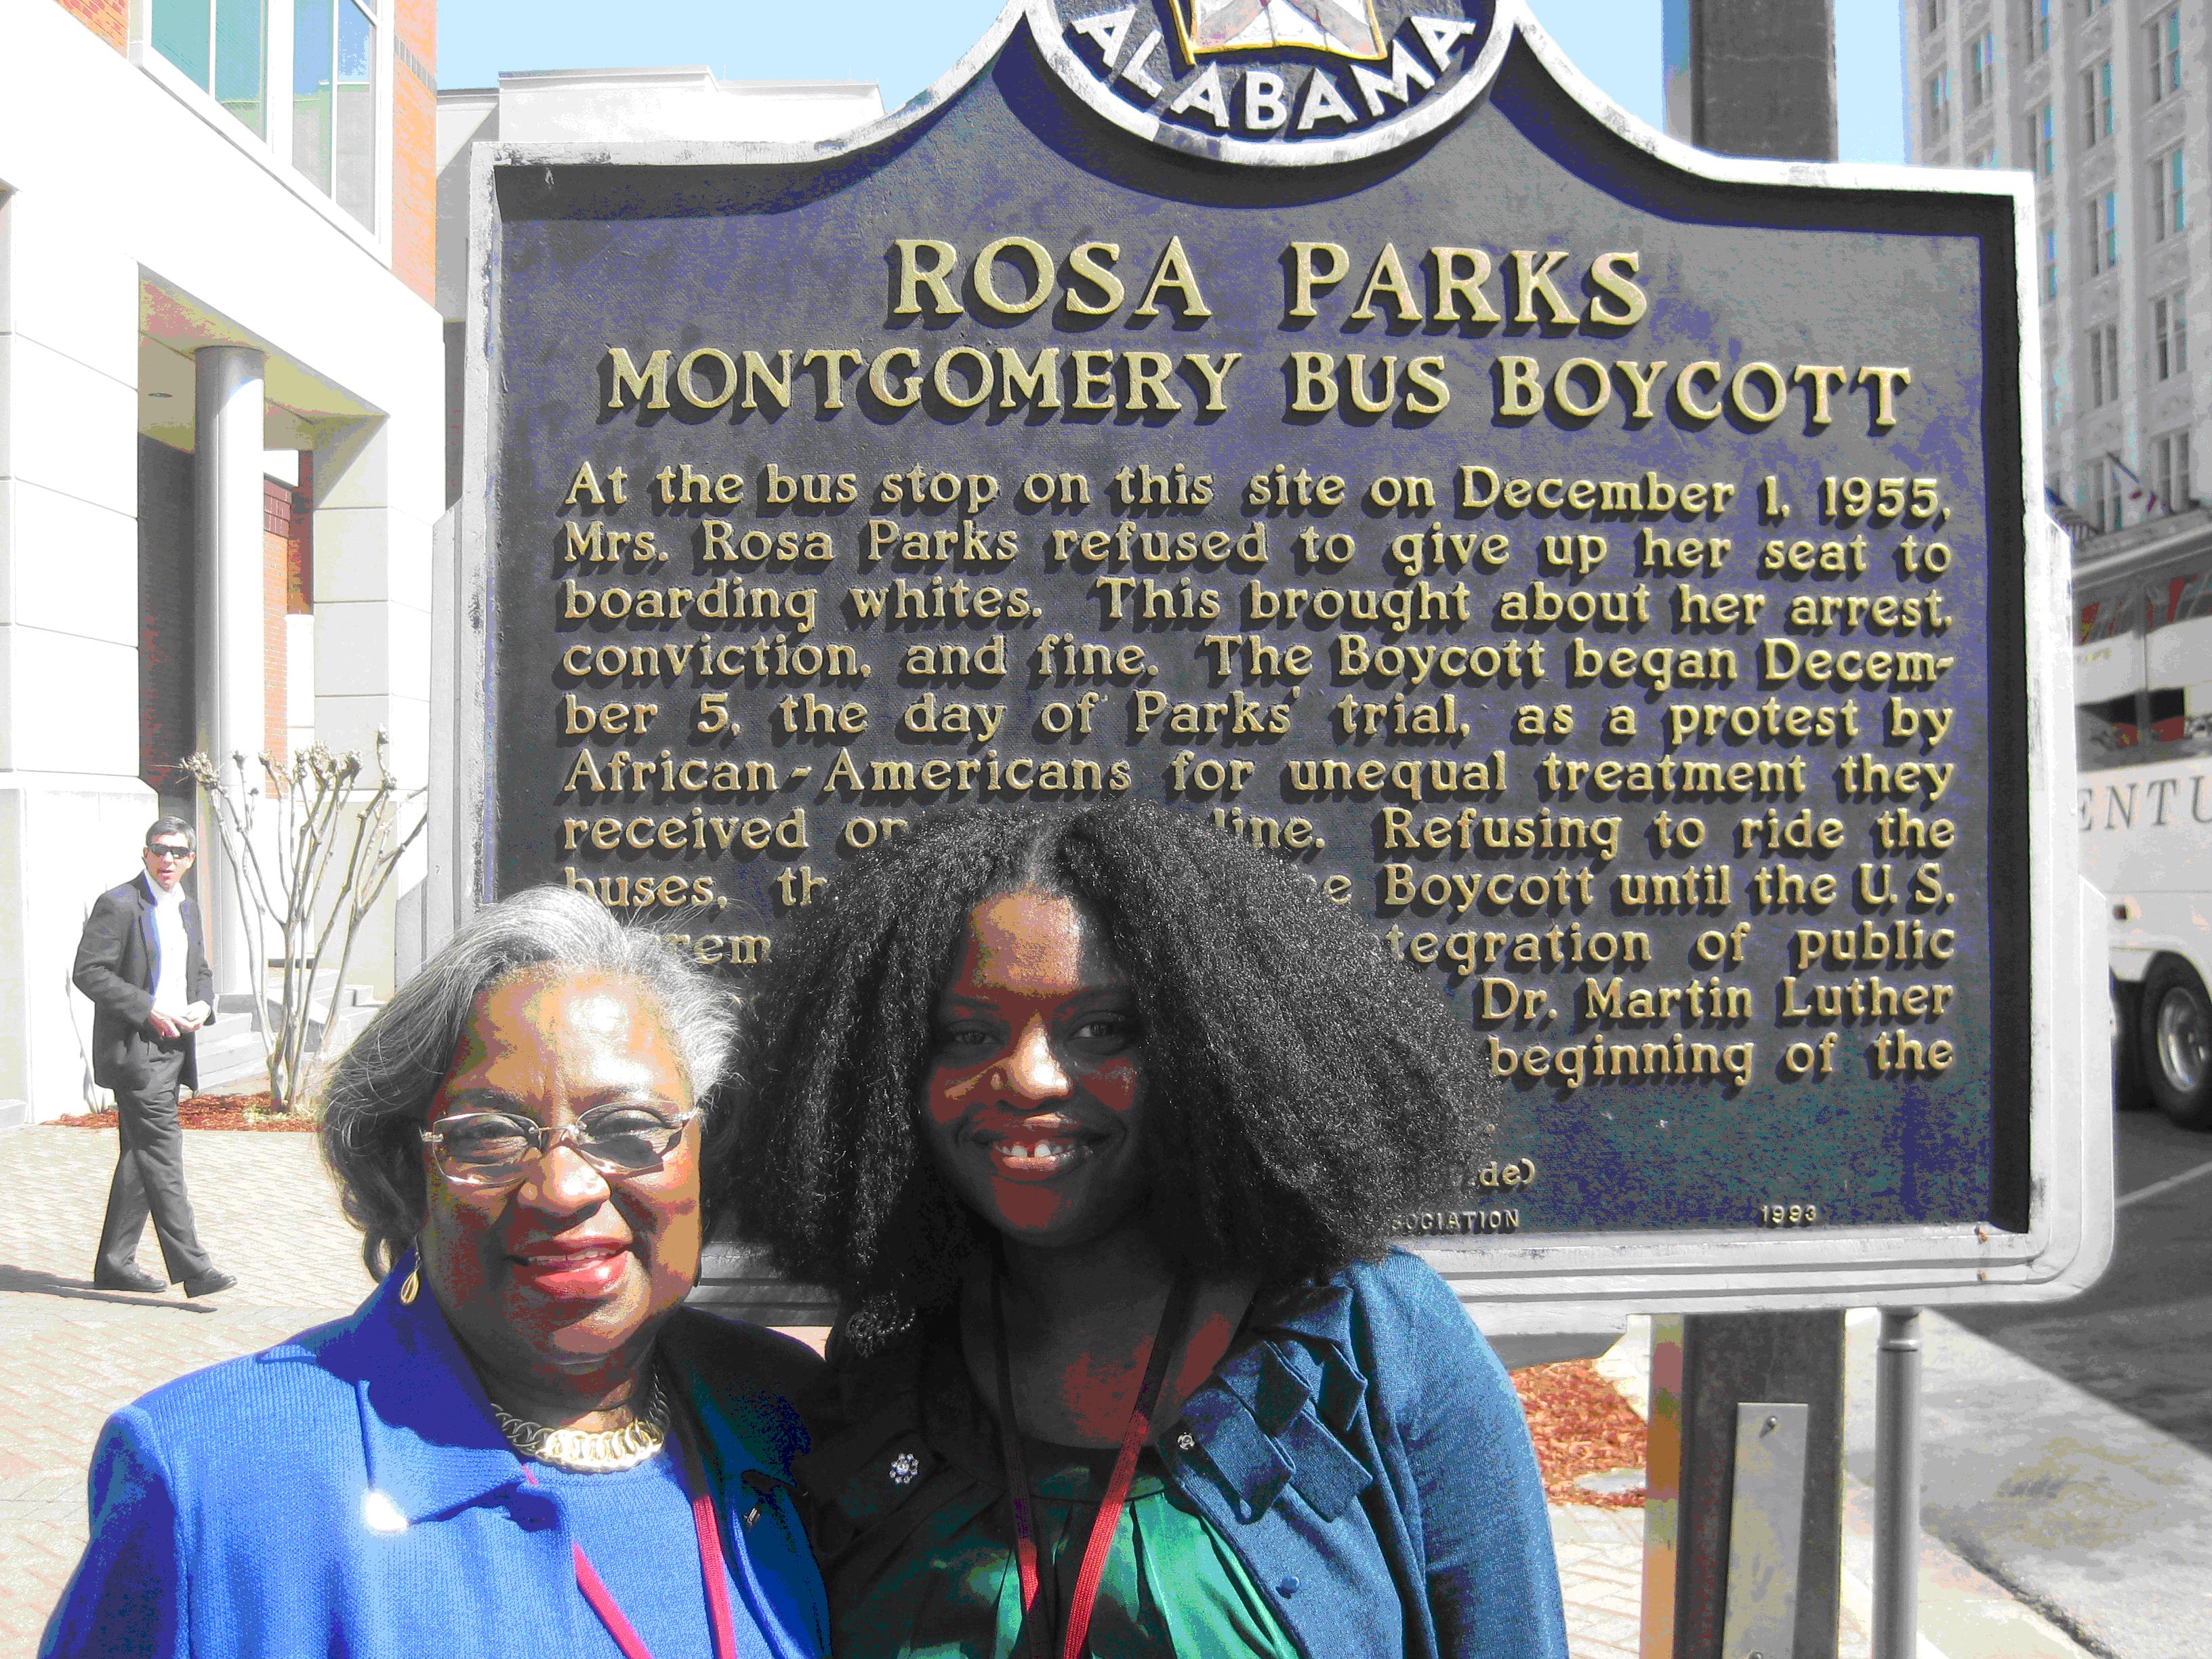 Picture of Juanita Abernathy (left) and Acacia Bamberg Salatti (right) standing in front of a memorial placard for the Rosa Parks Montgomery Bus Boycott in Montgomery, Alabama.